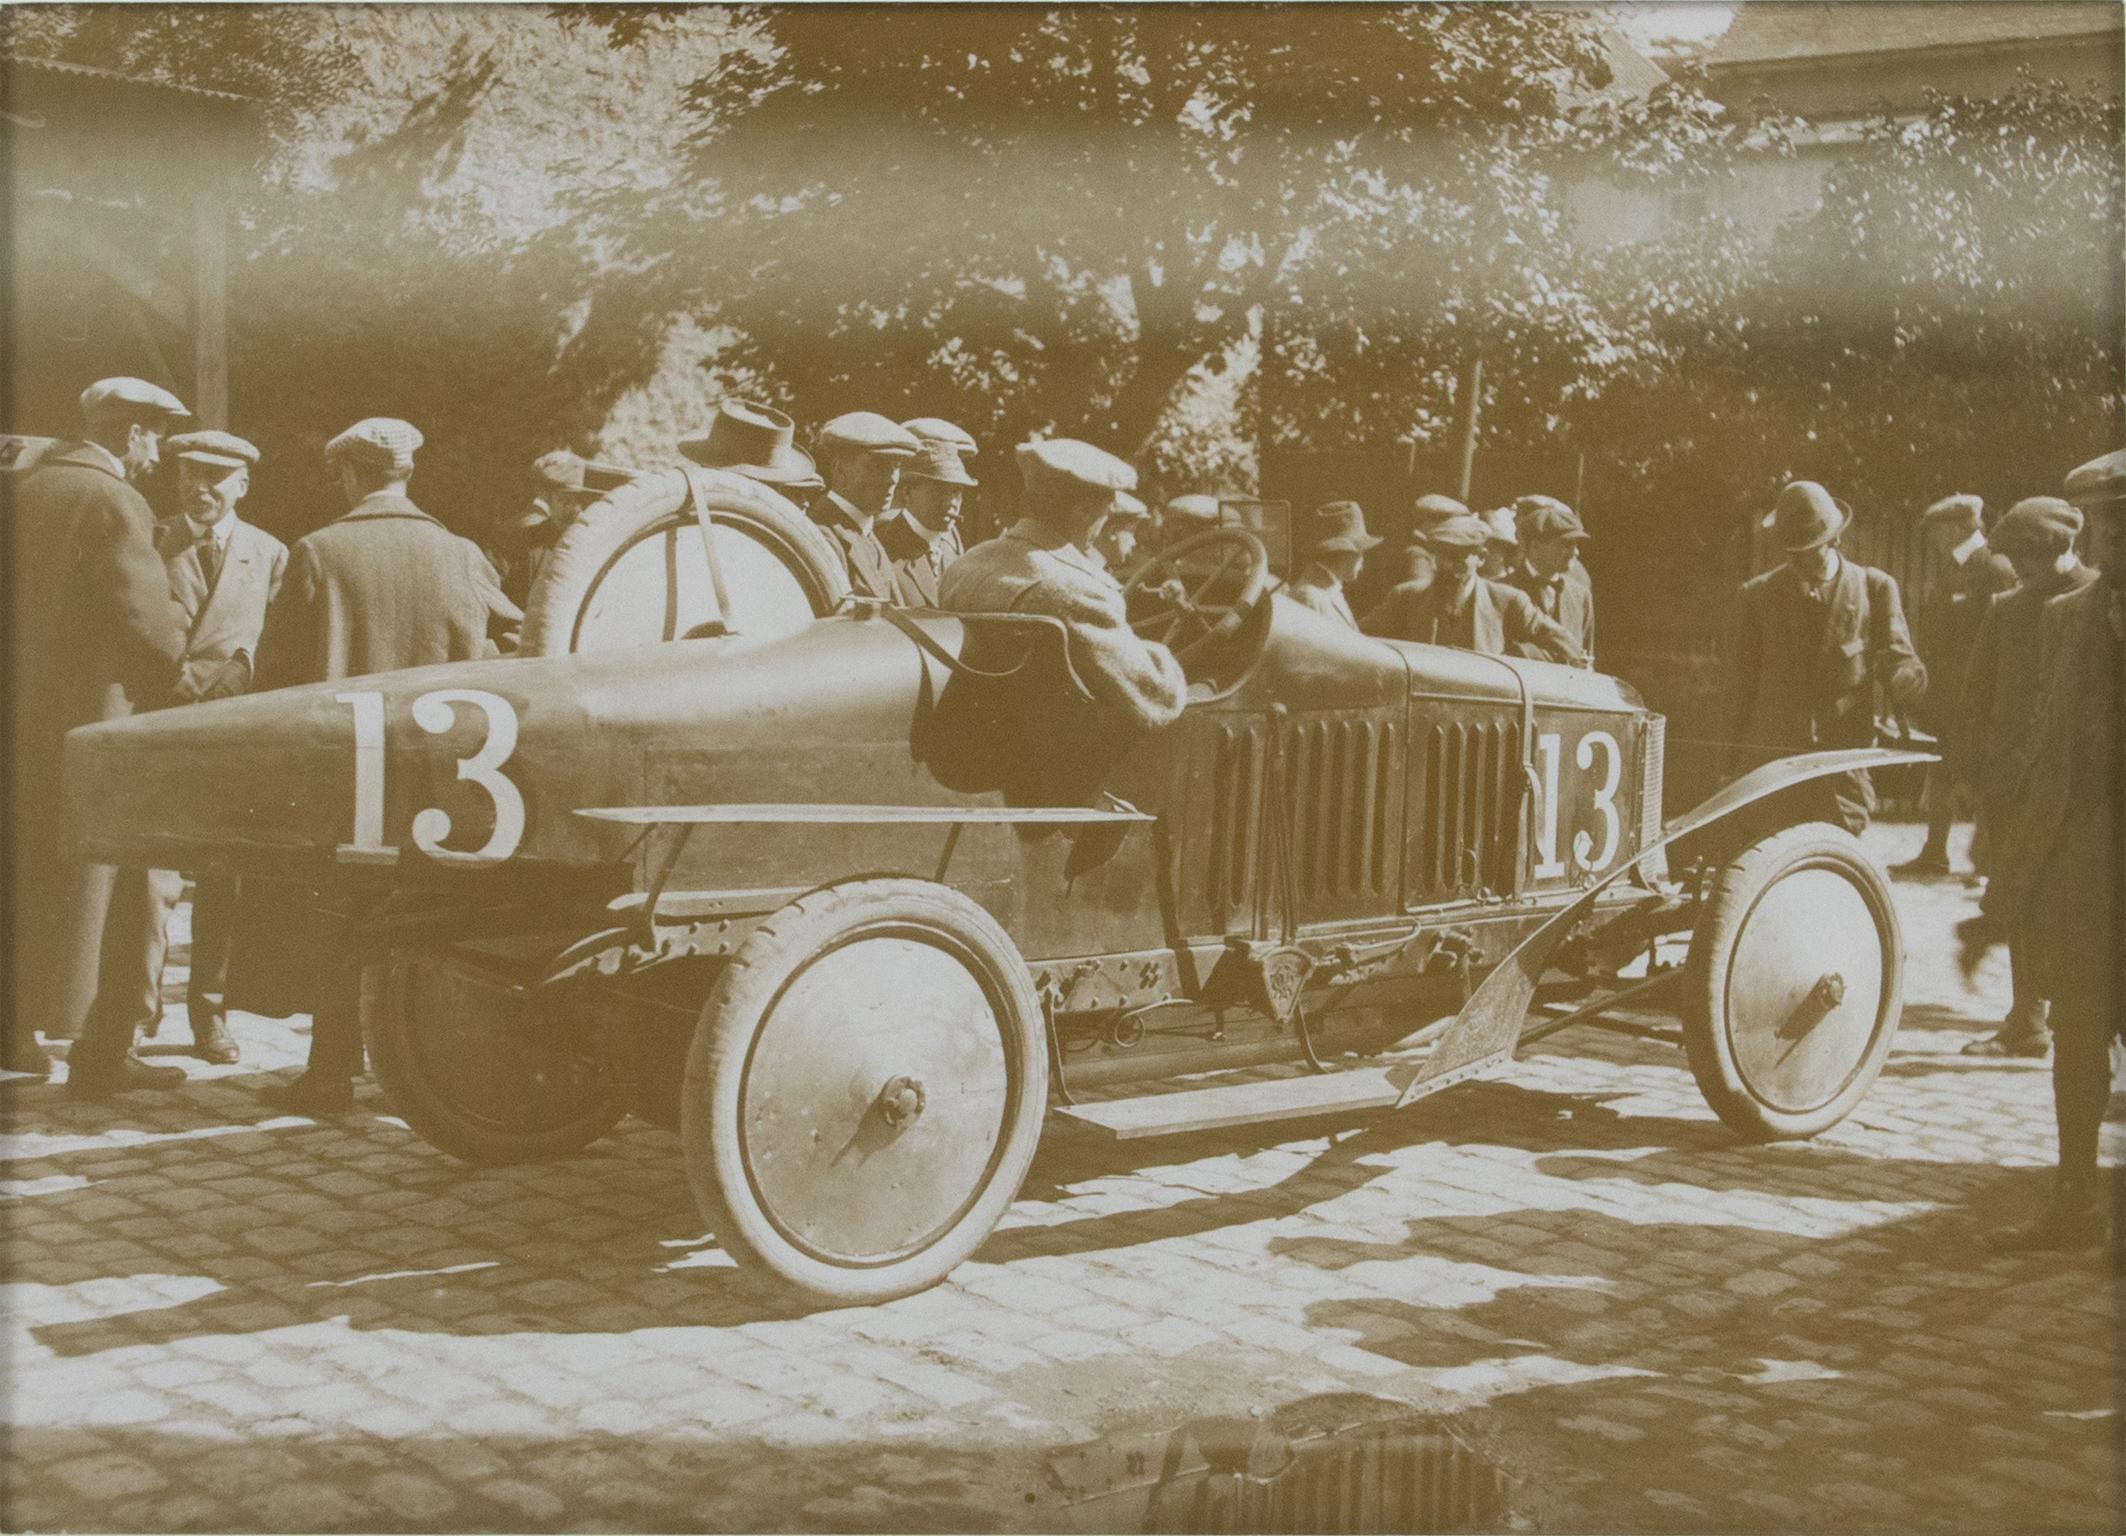 An original silver gelatin black and white photograph by Agence Meurisse Photographer. Car race in Boulogne sur Mer, France, 25th June 1911. 
This is a rare photography of the Vauxhall racer driven by legendary driver John Hancock during the 1911